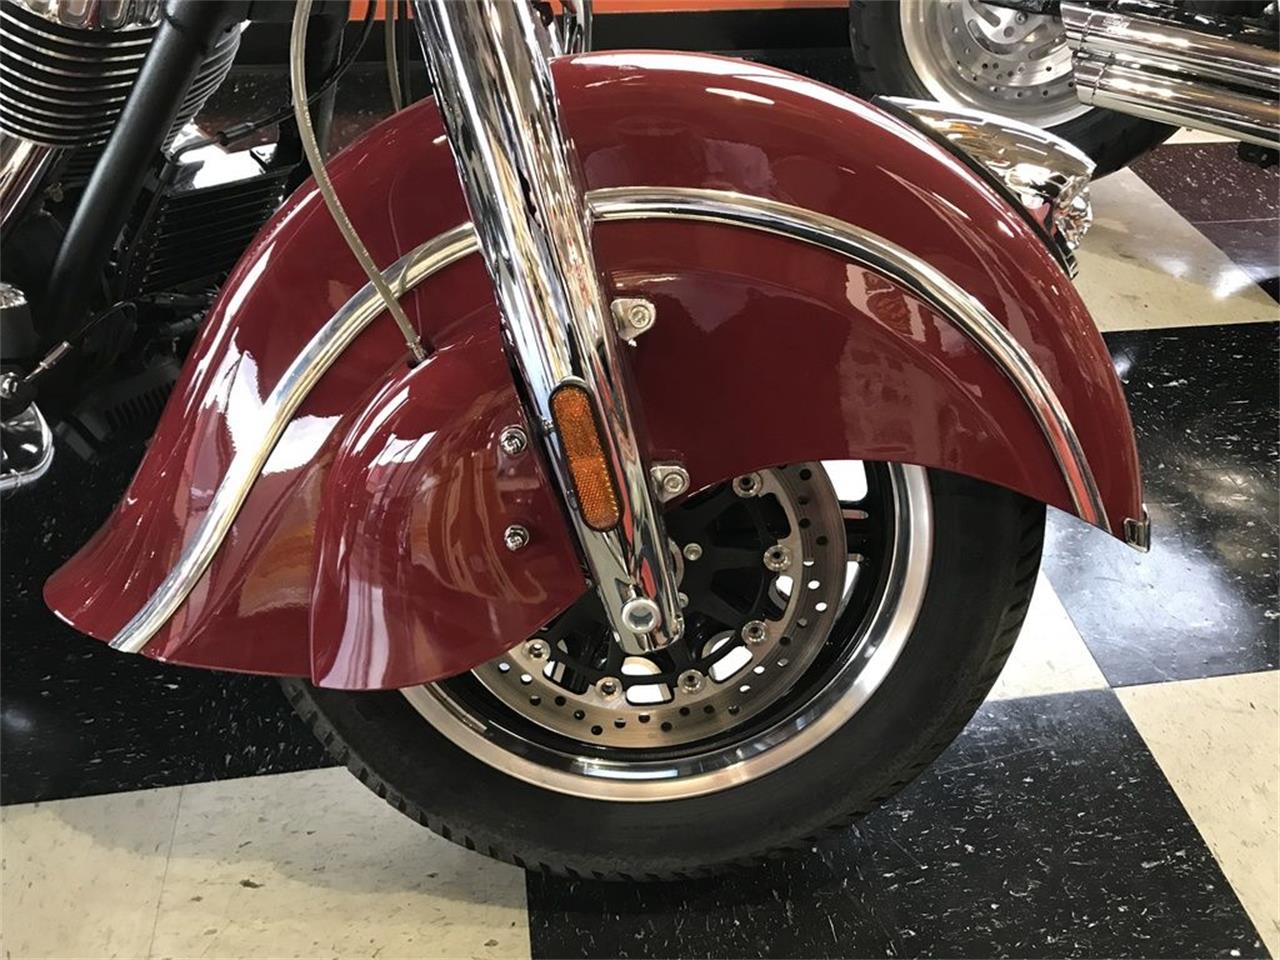 2014 Indian Chieftain for sale in Henderson, NV – photo 6